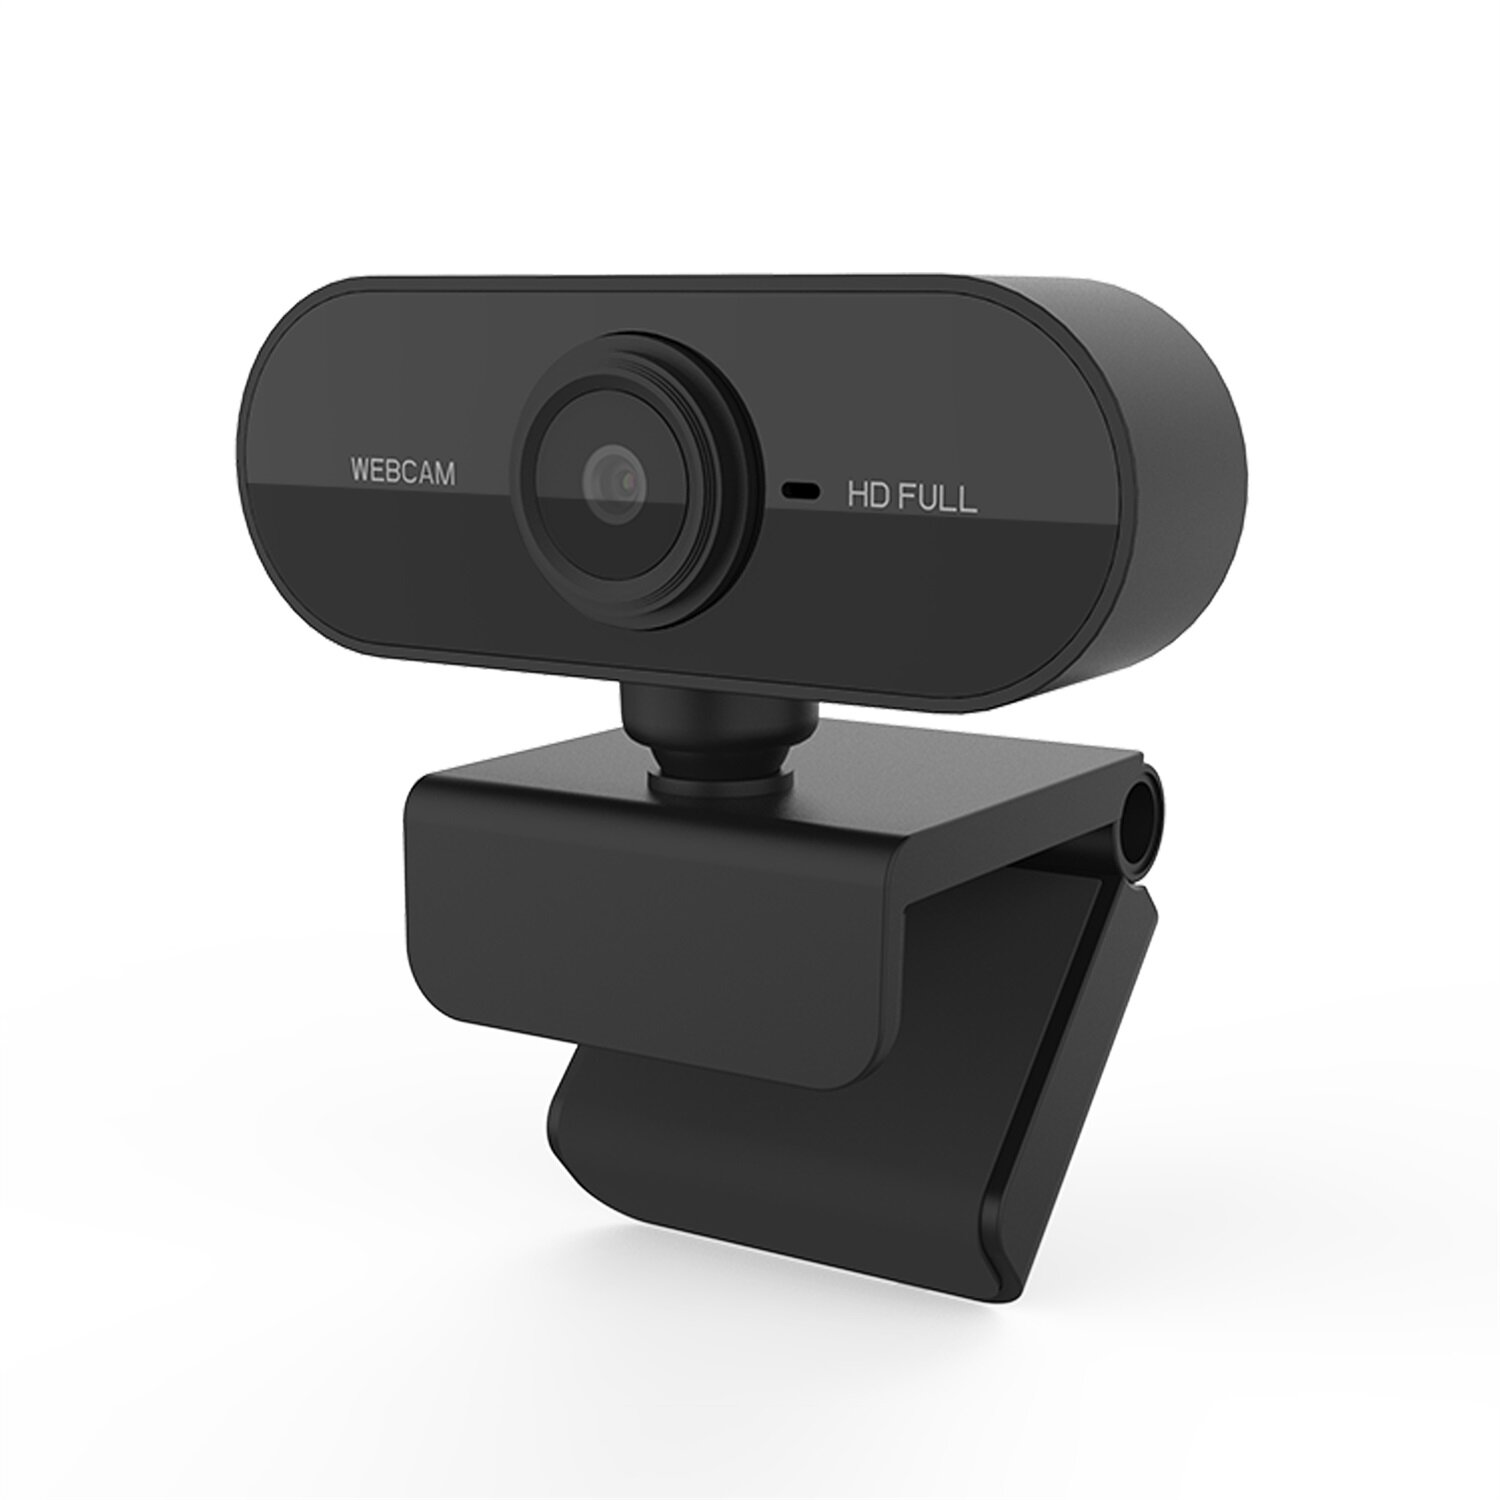 Hd 1080p webcam mini computer pc web camera with microphone rotatable cameras for live broadcast video calling